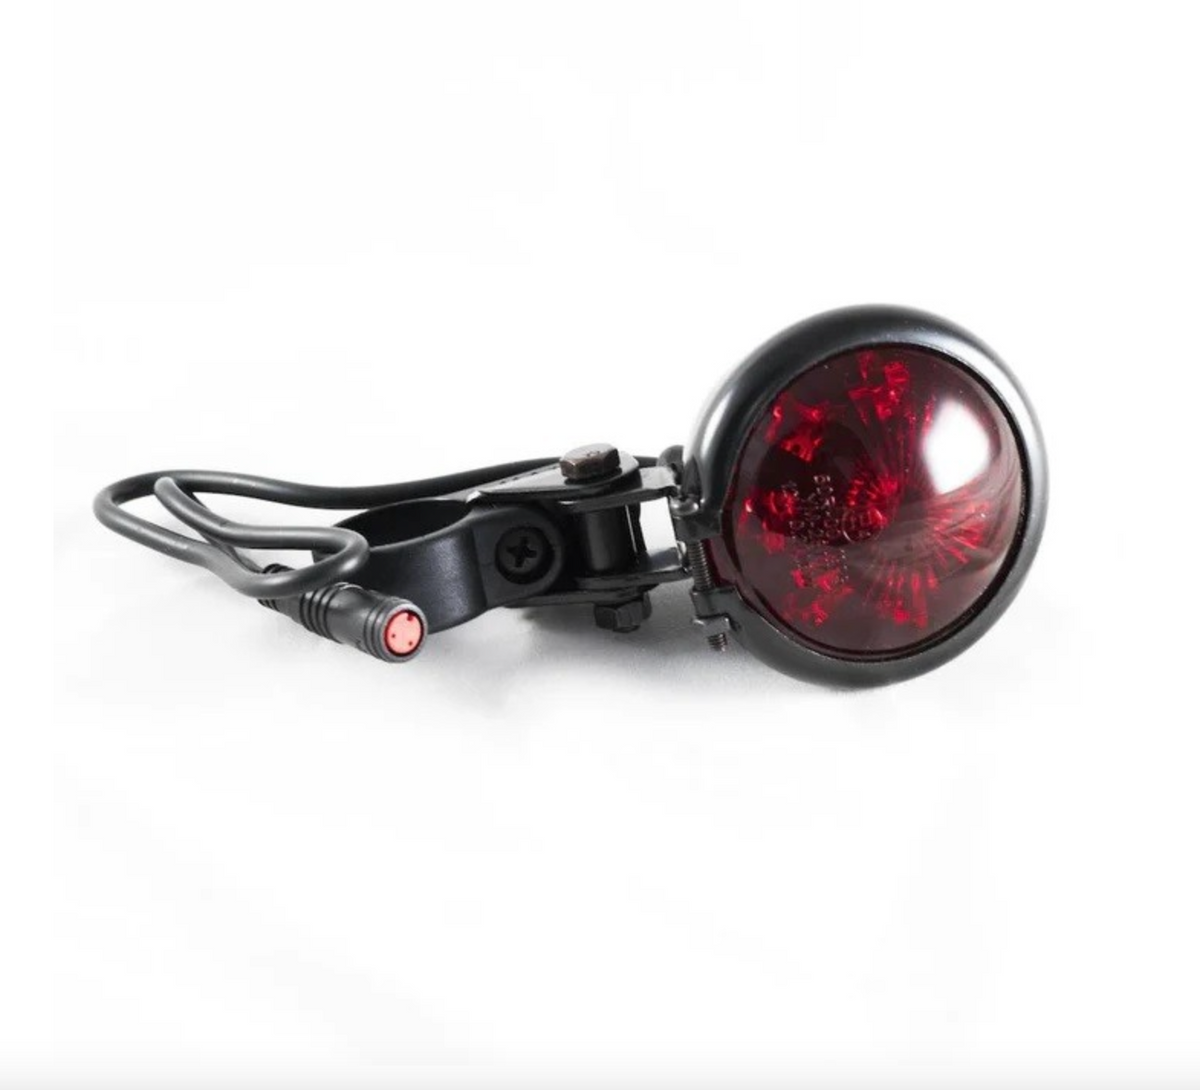 Urban Drivestyle / UD classic tail light